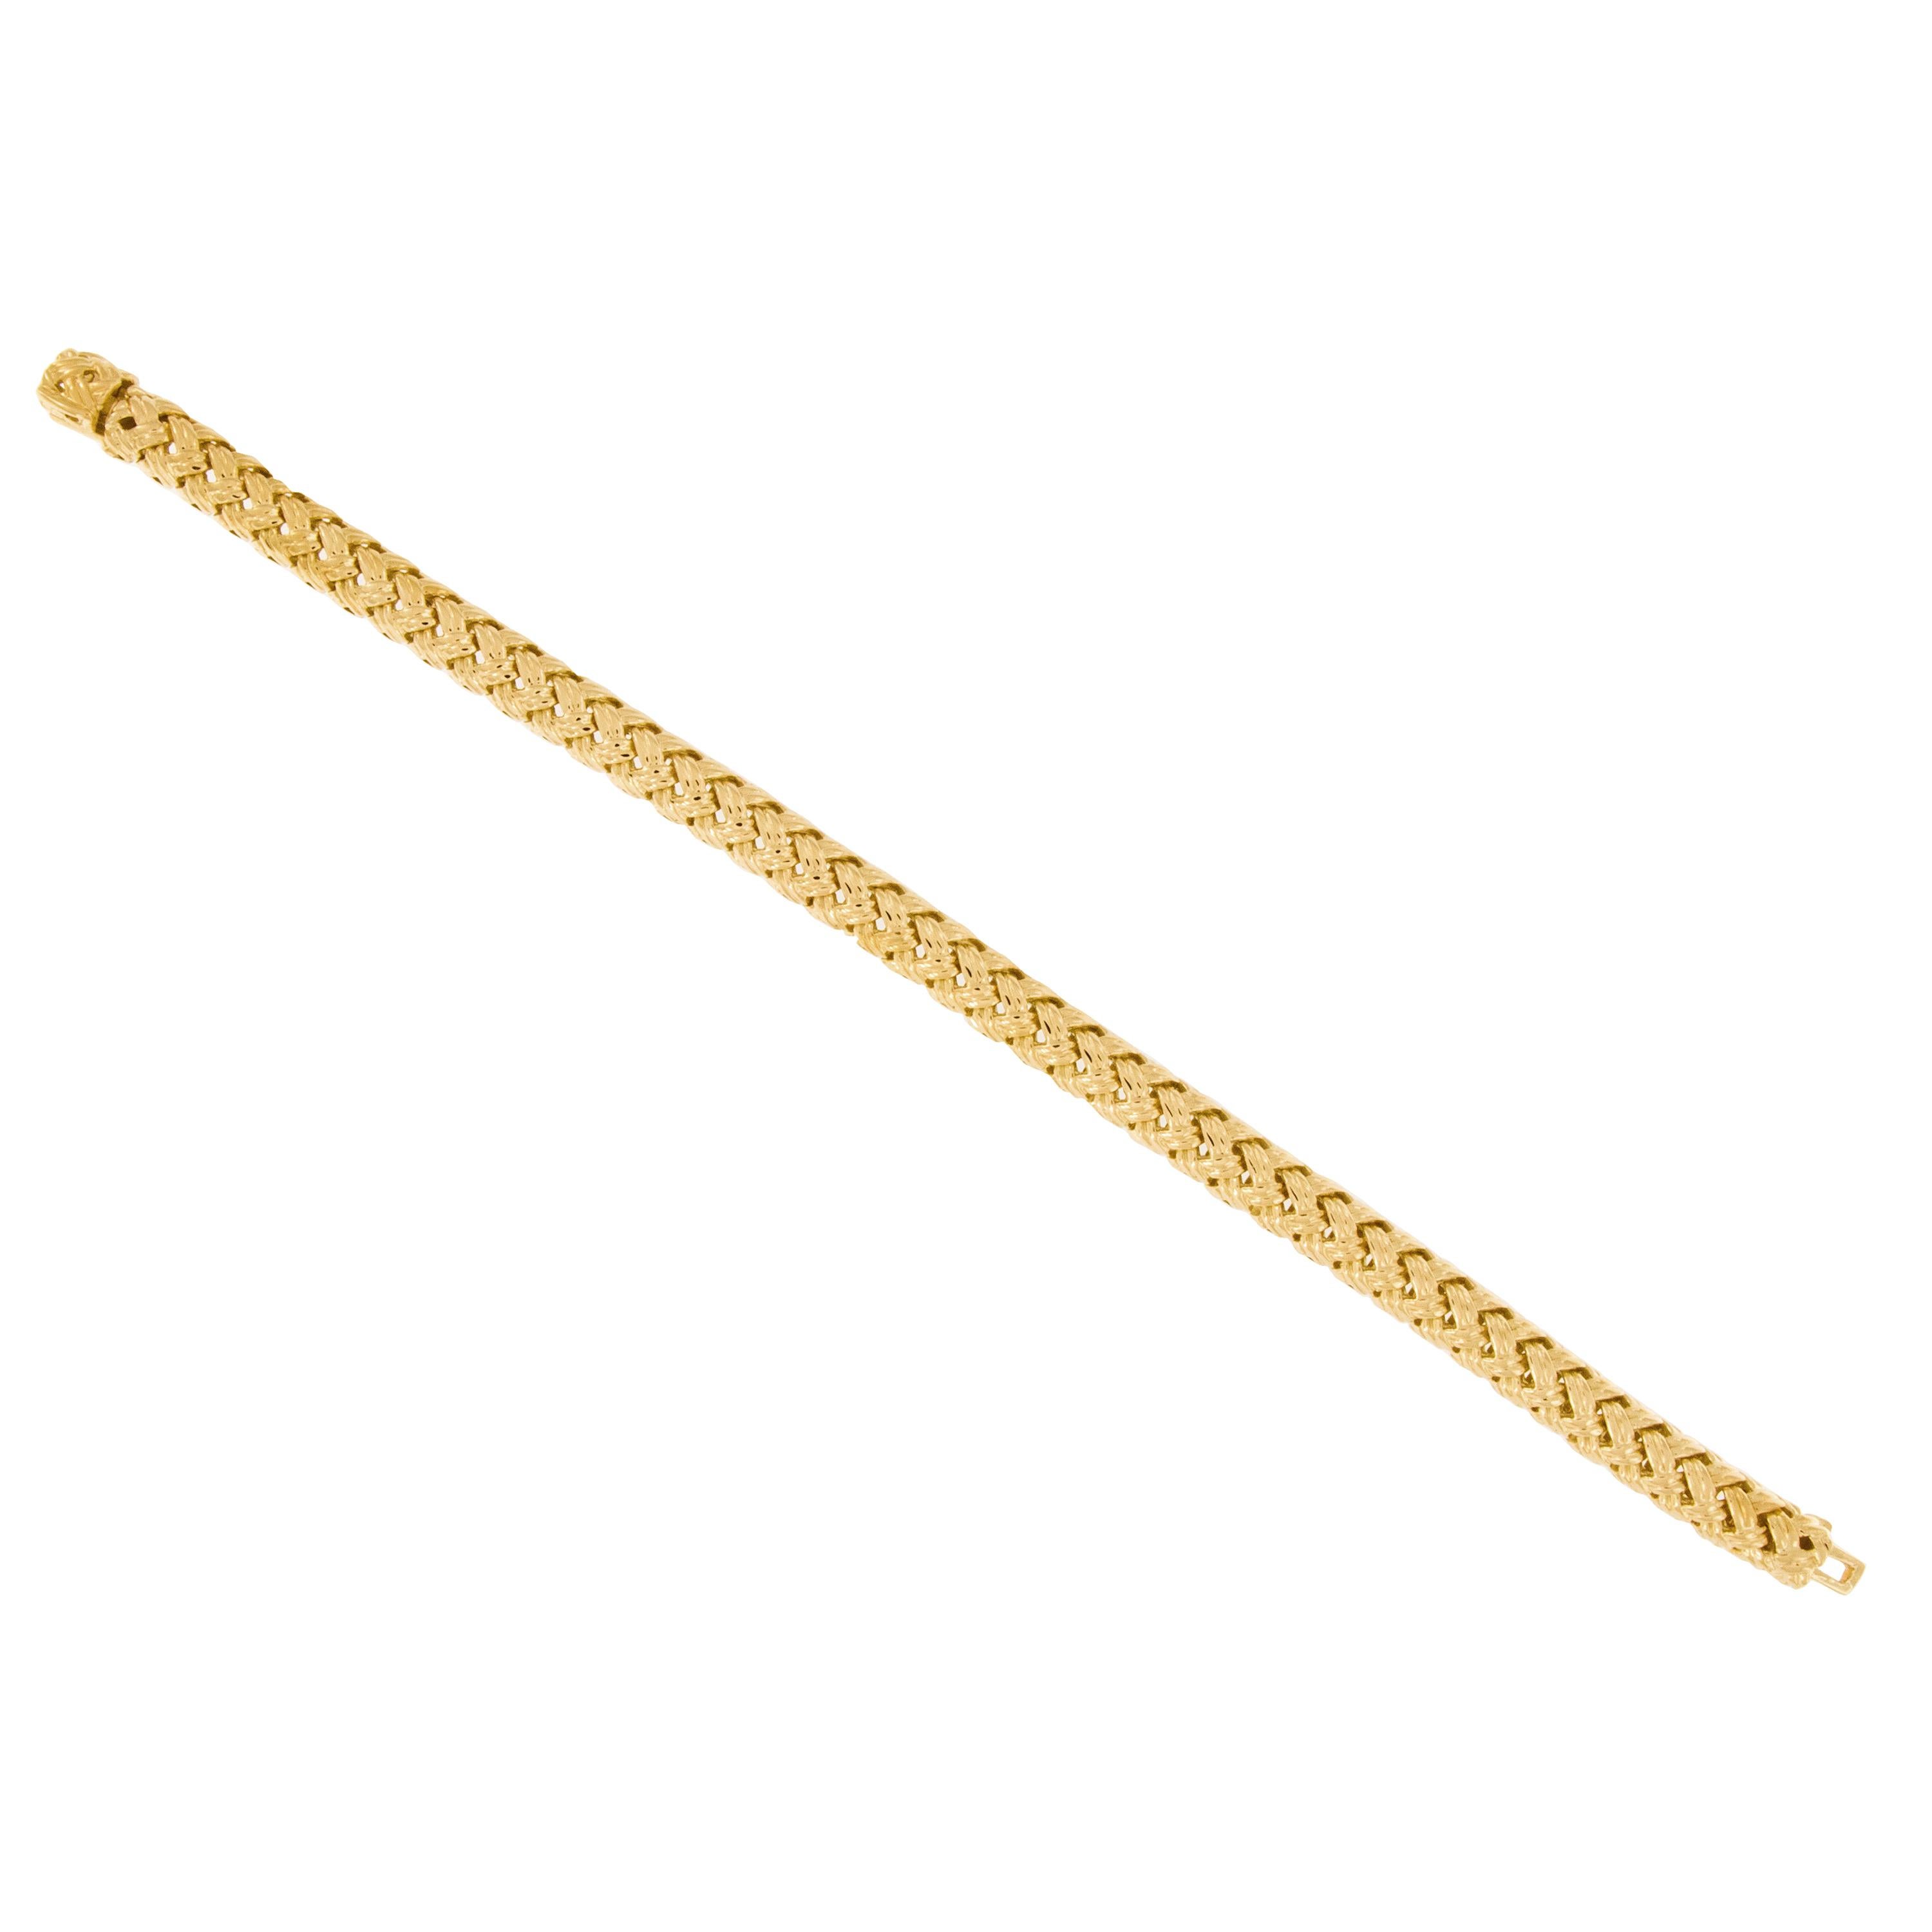 From the Vannerie Collection by Jean Vitau for Gemlok, this gorgeous 18 karat yellow gold interwoven & flexible bracelet is as comfortable on as it is beautiful! Jean Vitau founded Gemlok in New York city & quickly became famous for his unique way